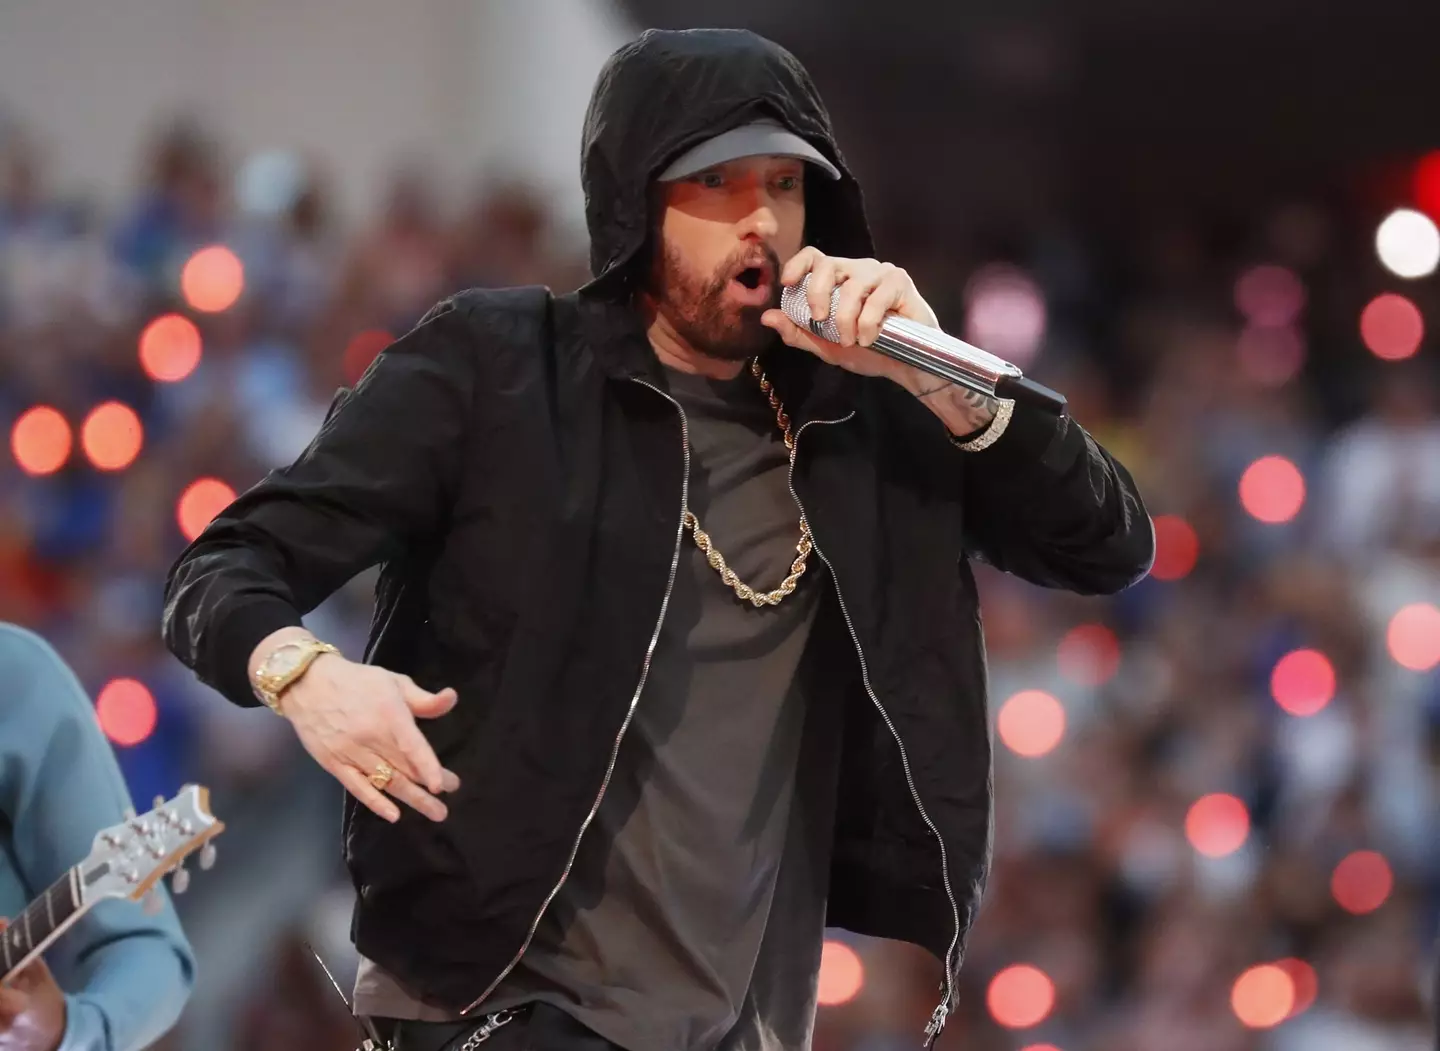 Eminem discussed his overdose with his longtime manager, Paul Rosenberg.